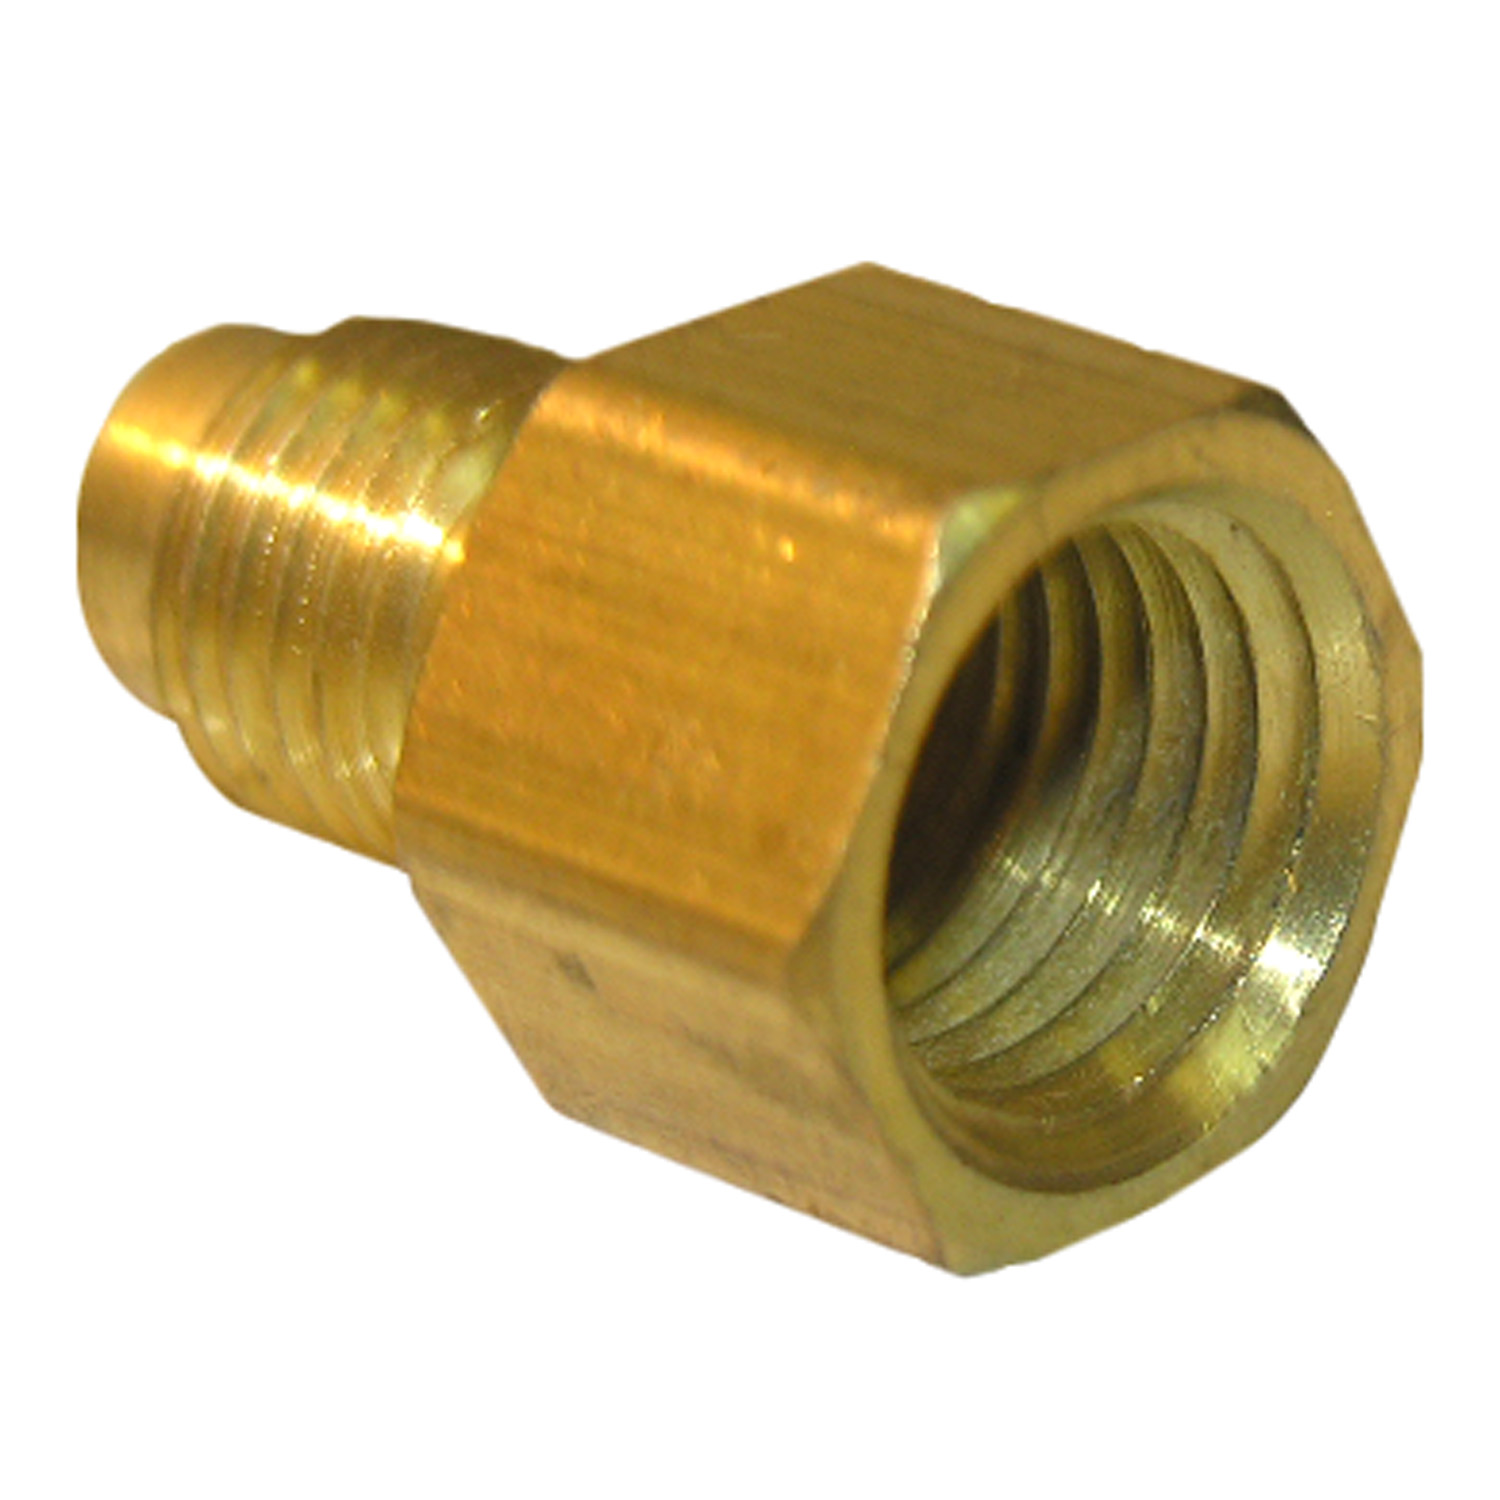 17-4611 Pipe Adapter, 1/4 in, Male Flare x FPT, Brass, 1400 psi Pressure